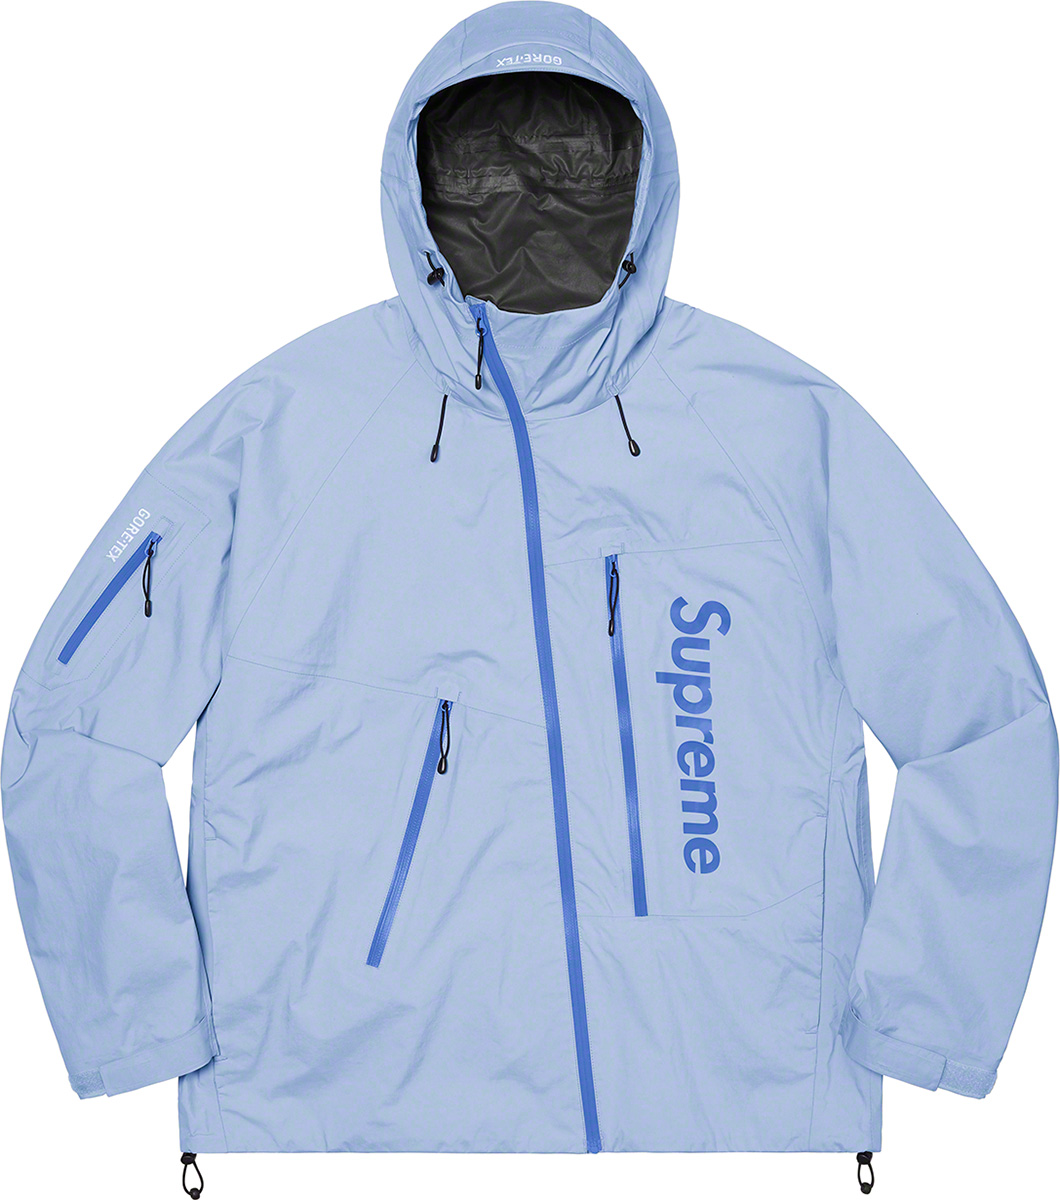 GORE-TEX Paclite Shell Jacket | Supreme - SLN Official